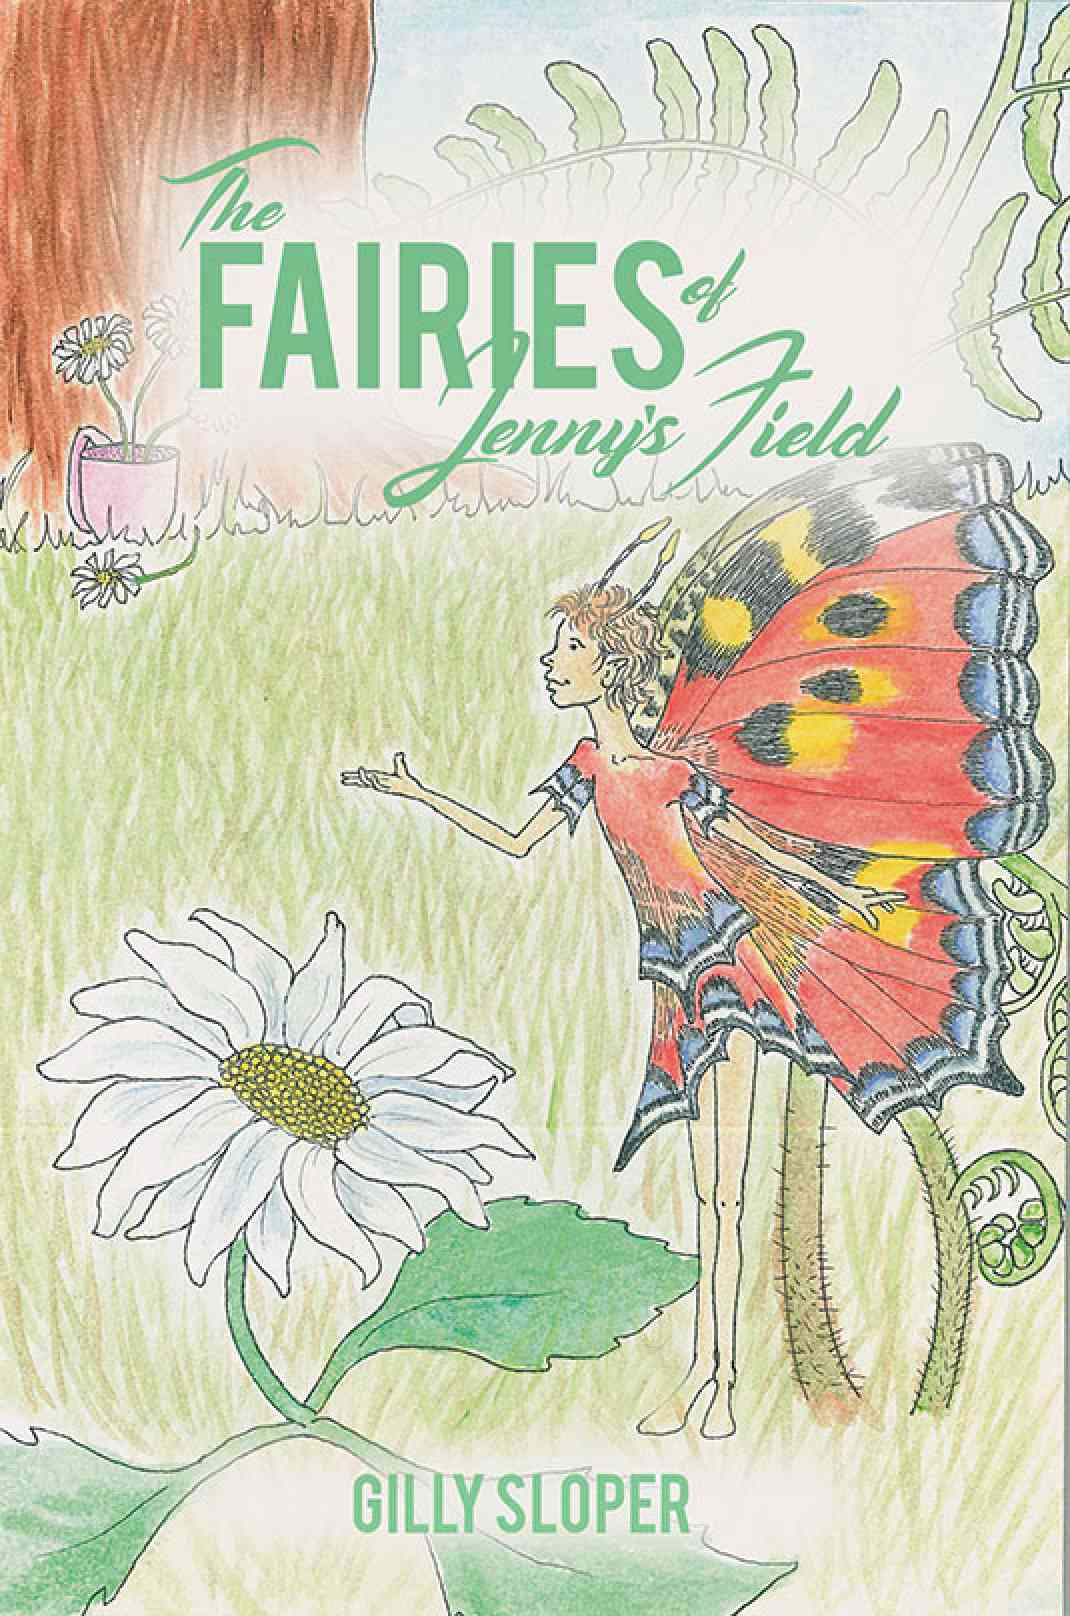 Cornwall Today discovers the Magic of ‘The Fairies of Jenny’s Field’